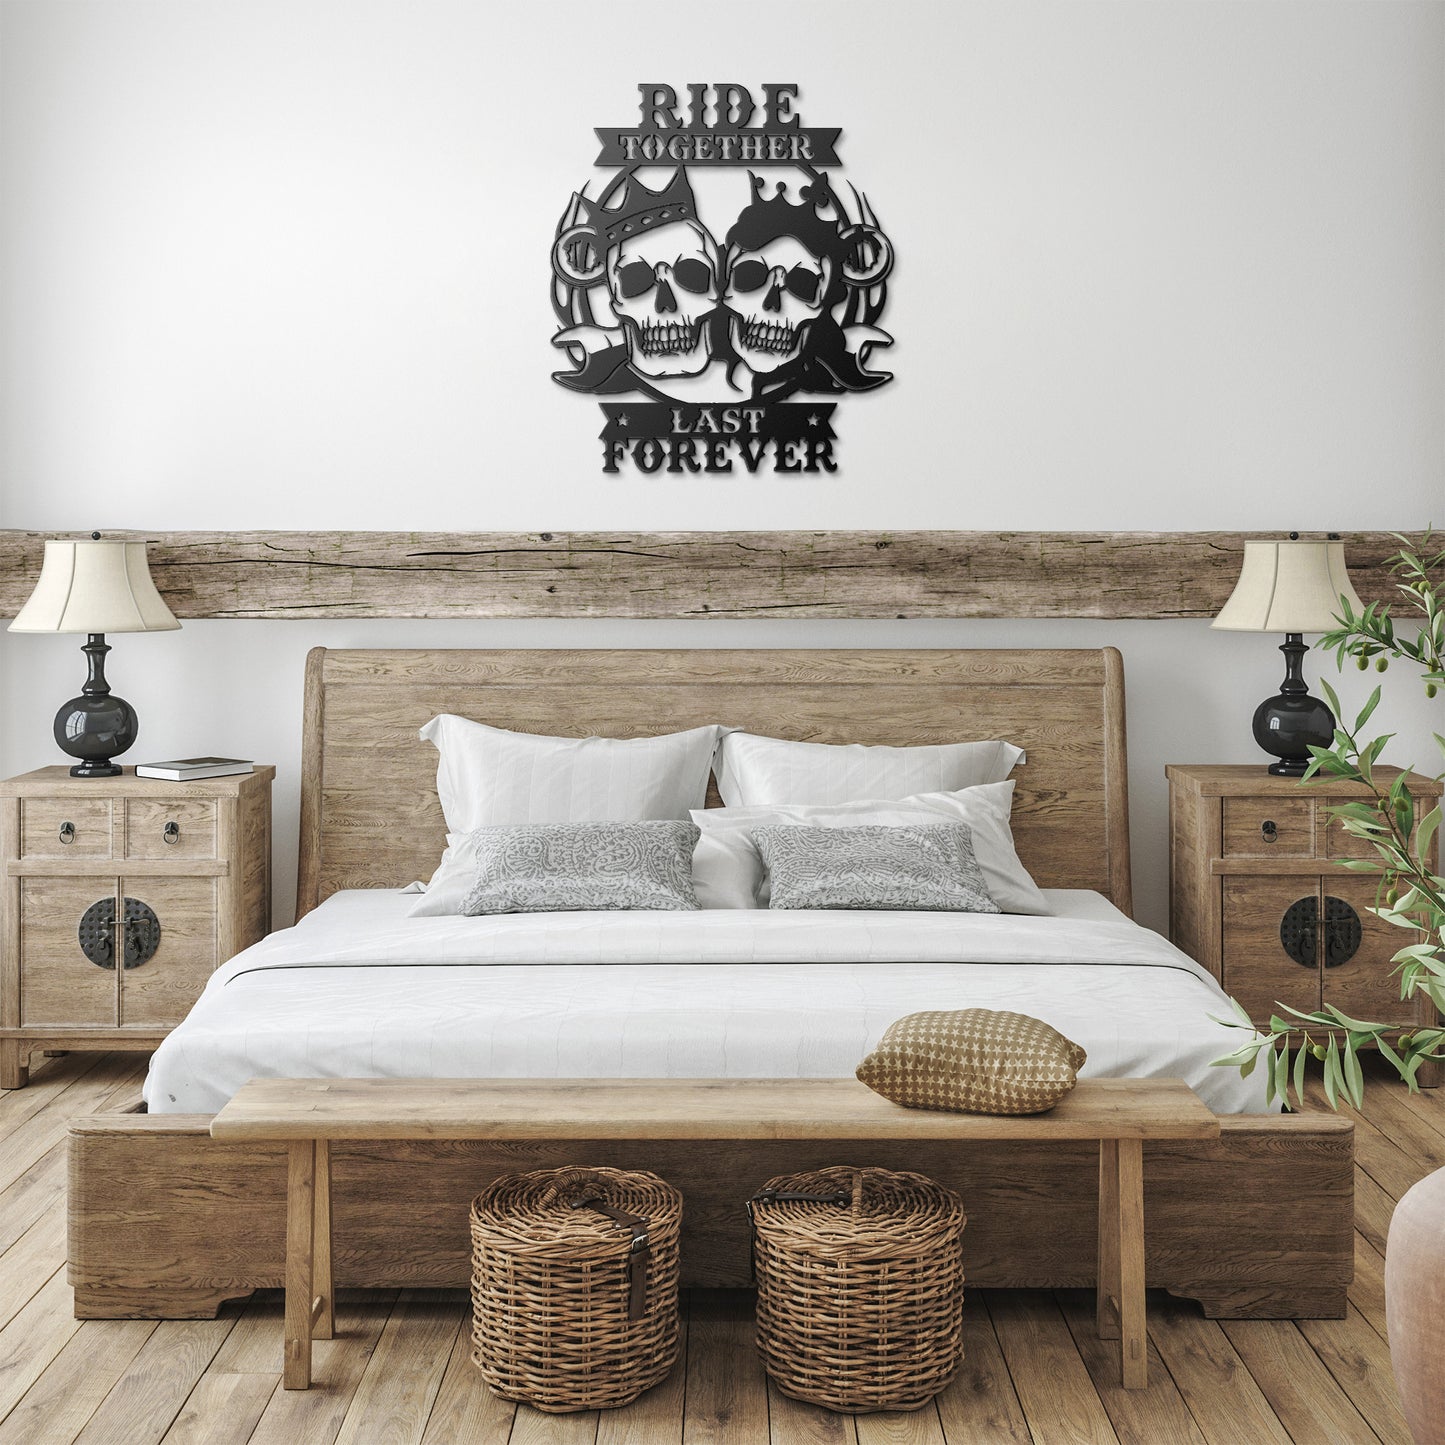 Ride Together Last Forever Metal Wall Art